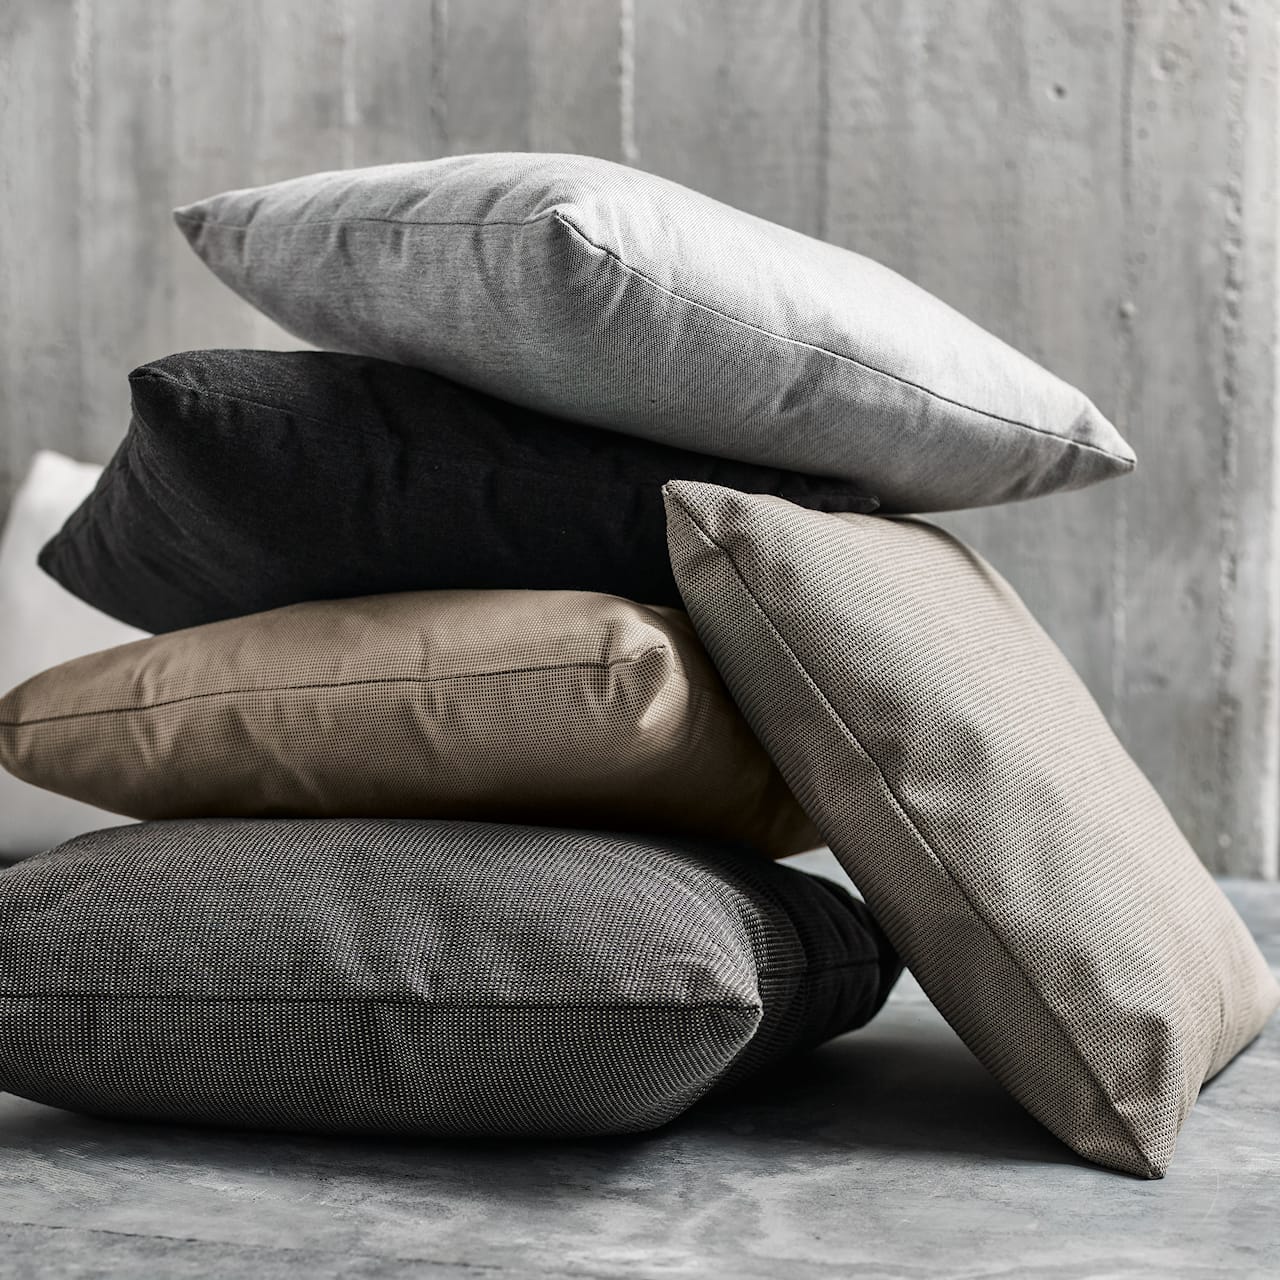 Deco Square Scatter Cushion Large